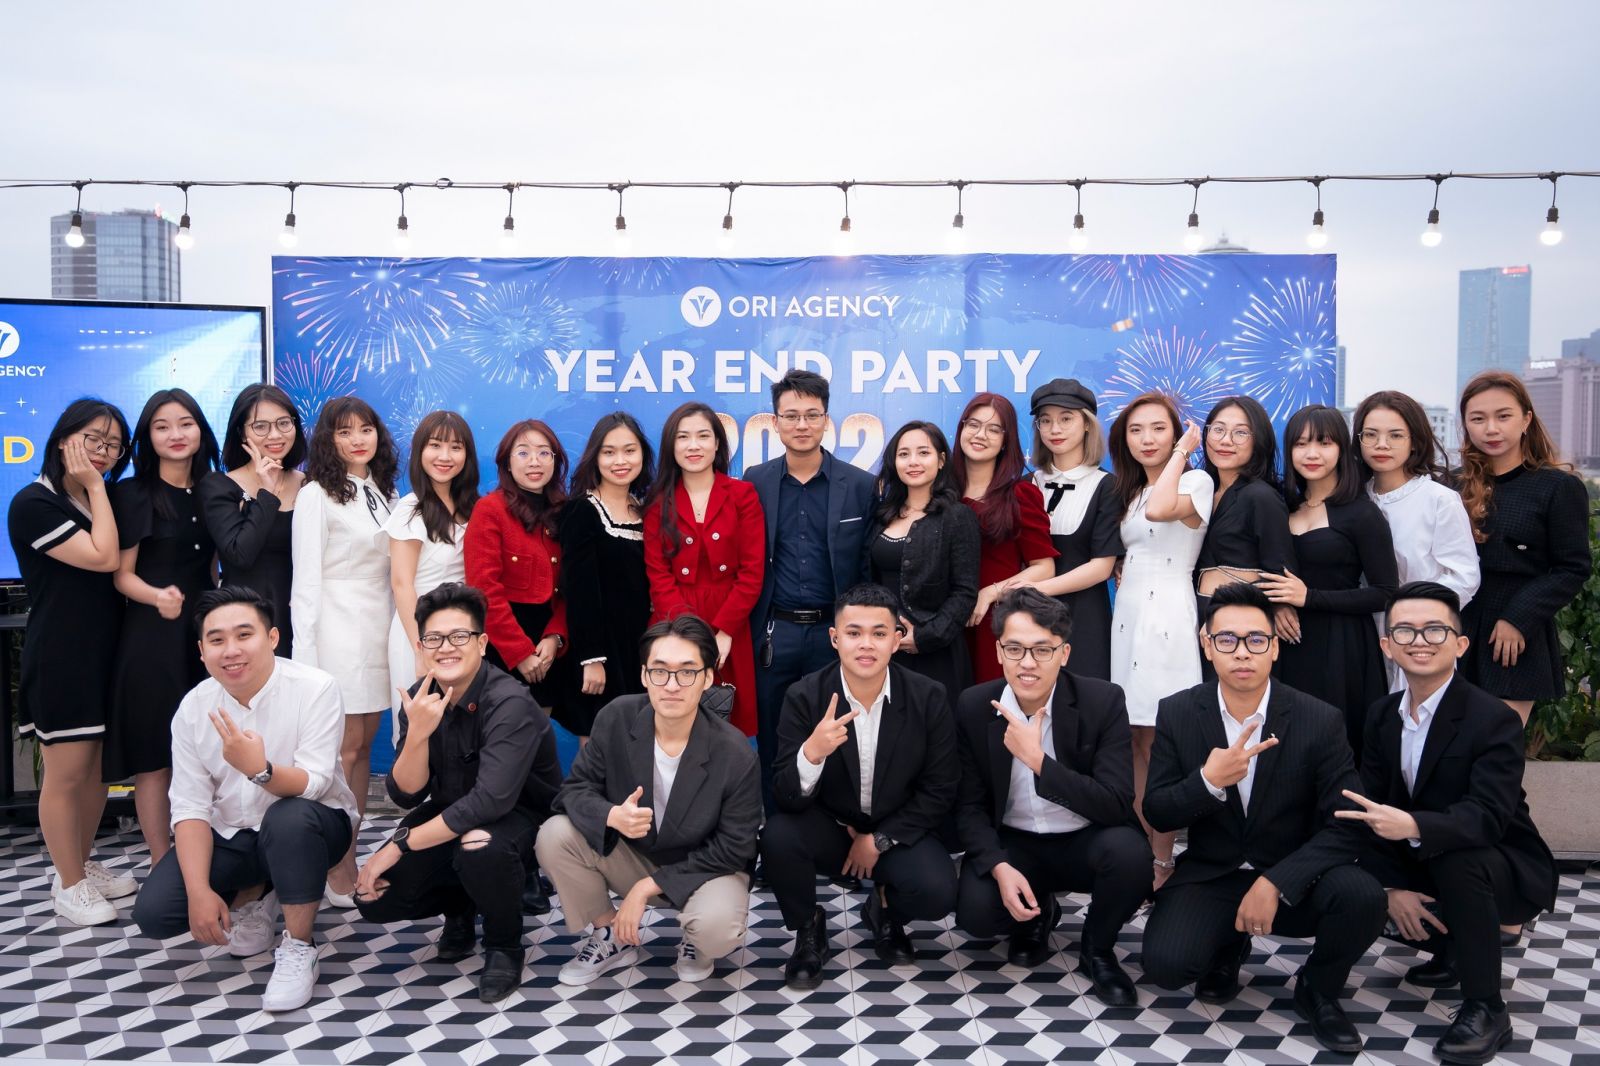 YEAR END PARTY 2022